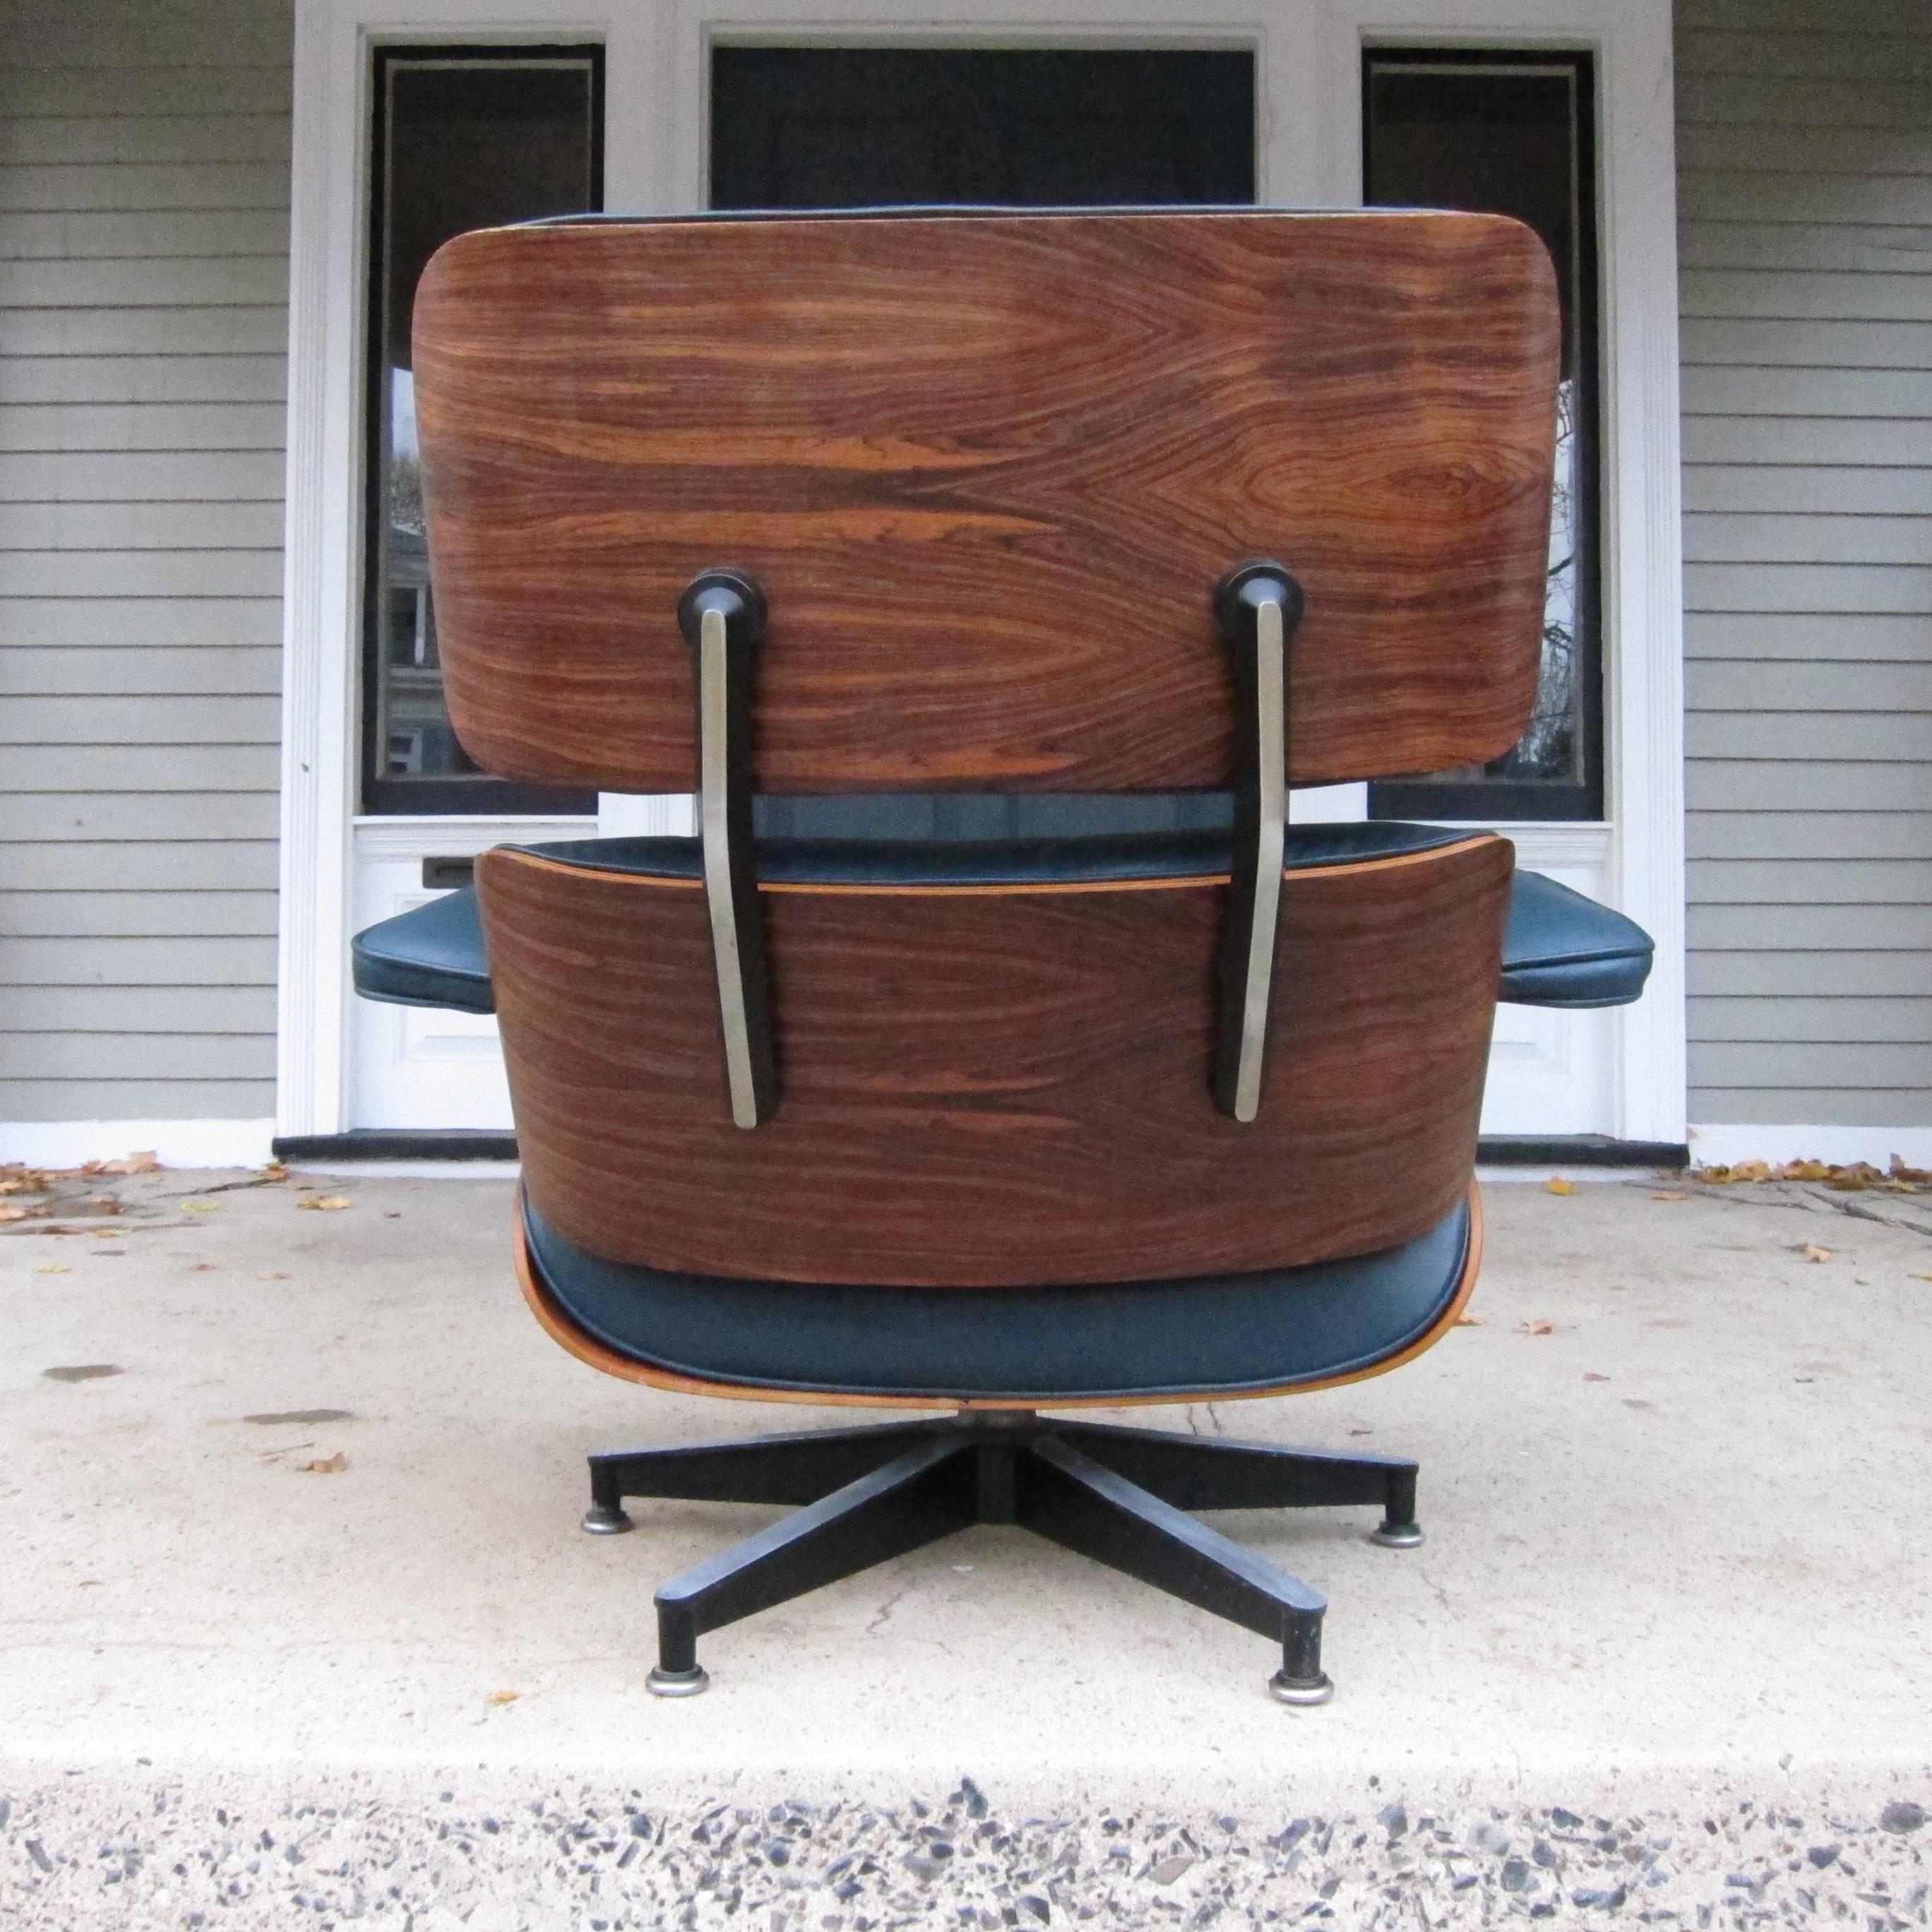 Eames lounge chair in Brazilian rosewood and custom indigo leather. As nice as a vintage lounge gets in near perfect condition. Originally purchase with other chair and ottoman, the only time we have come across this color. Signed 1976 on Herman